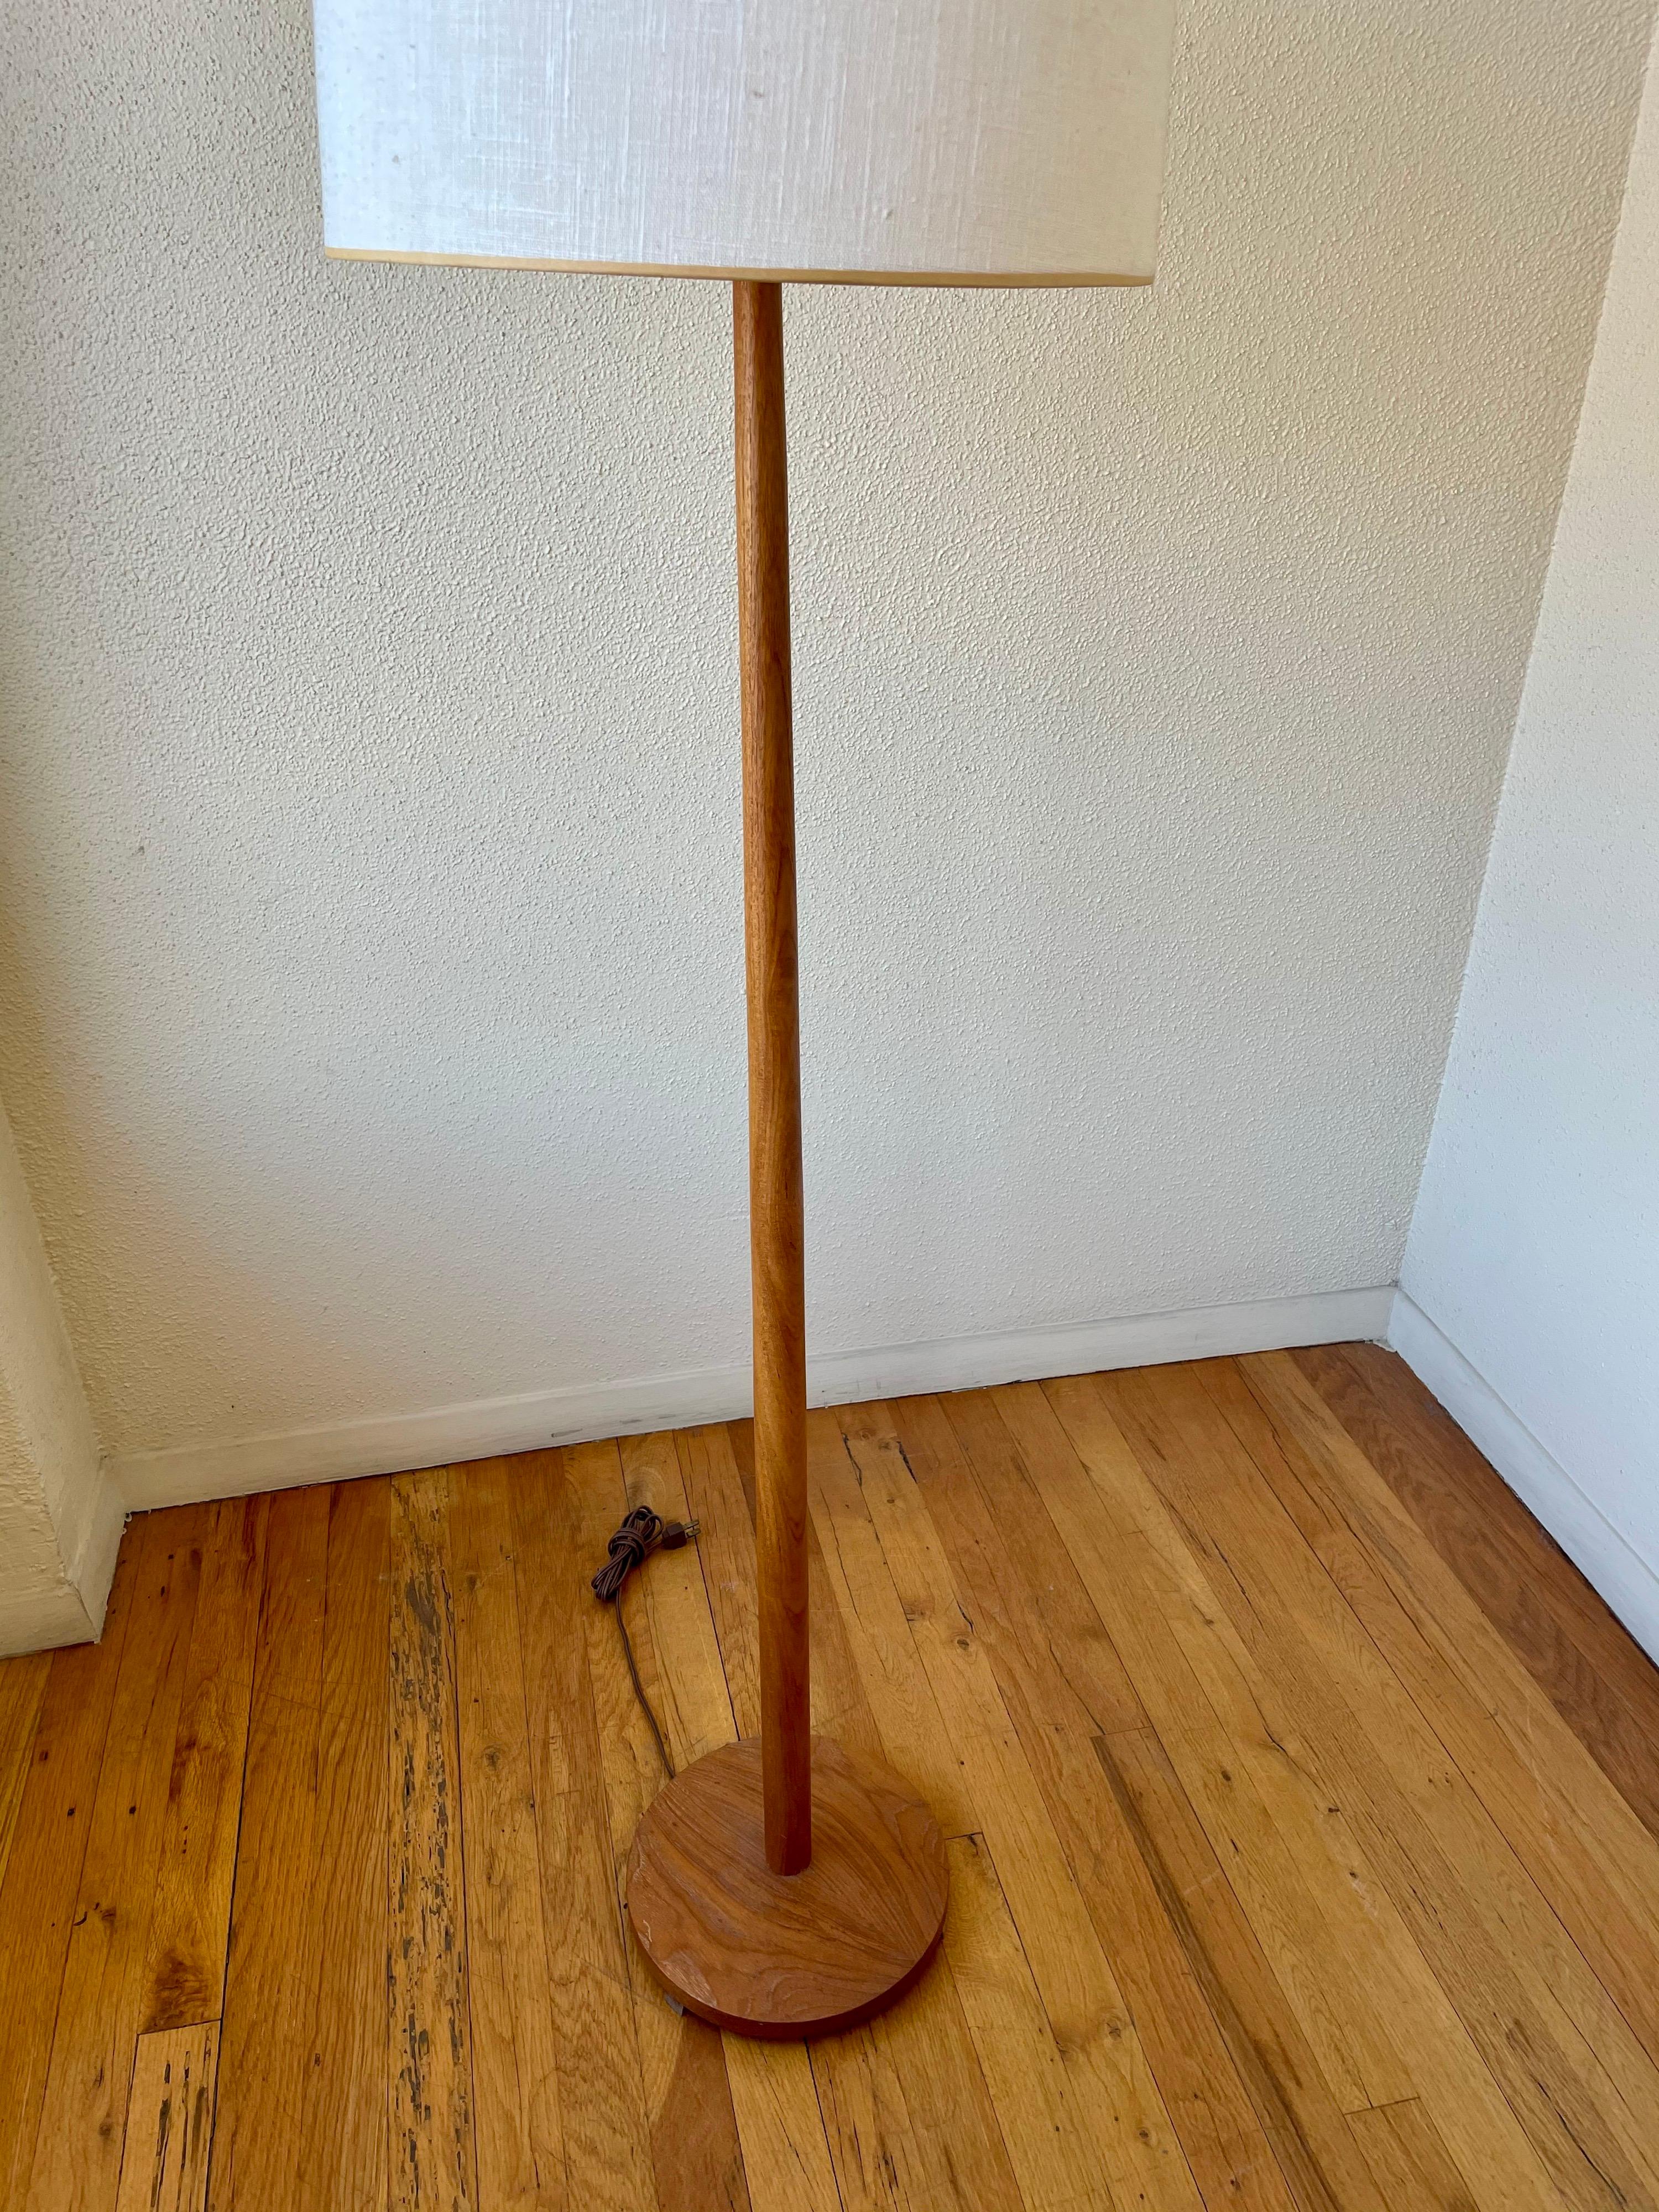 Simple elegant solid teak floor lamp, rewired, lampshade it’s included, its the original some wear due to age. 57